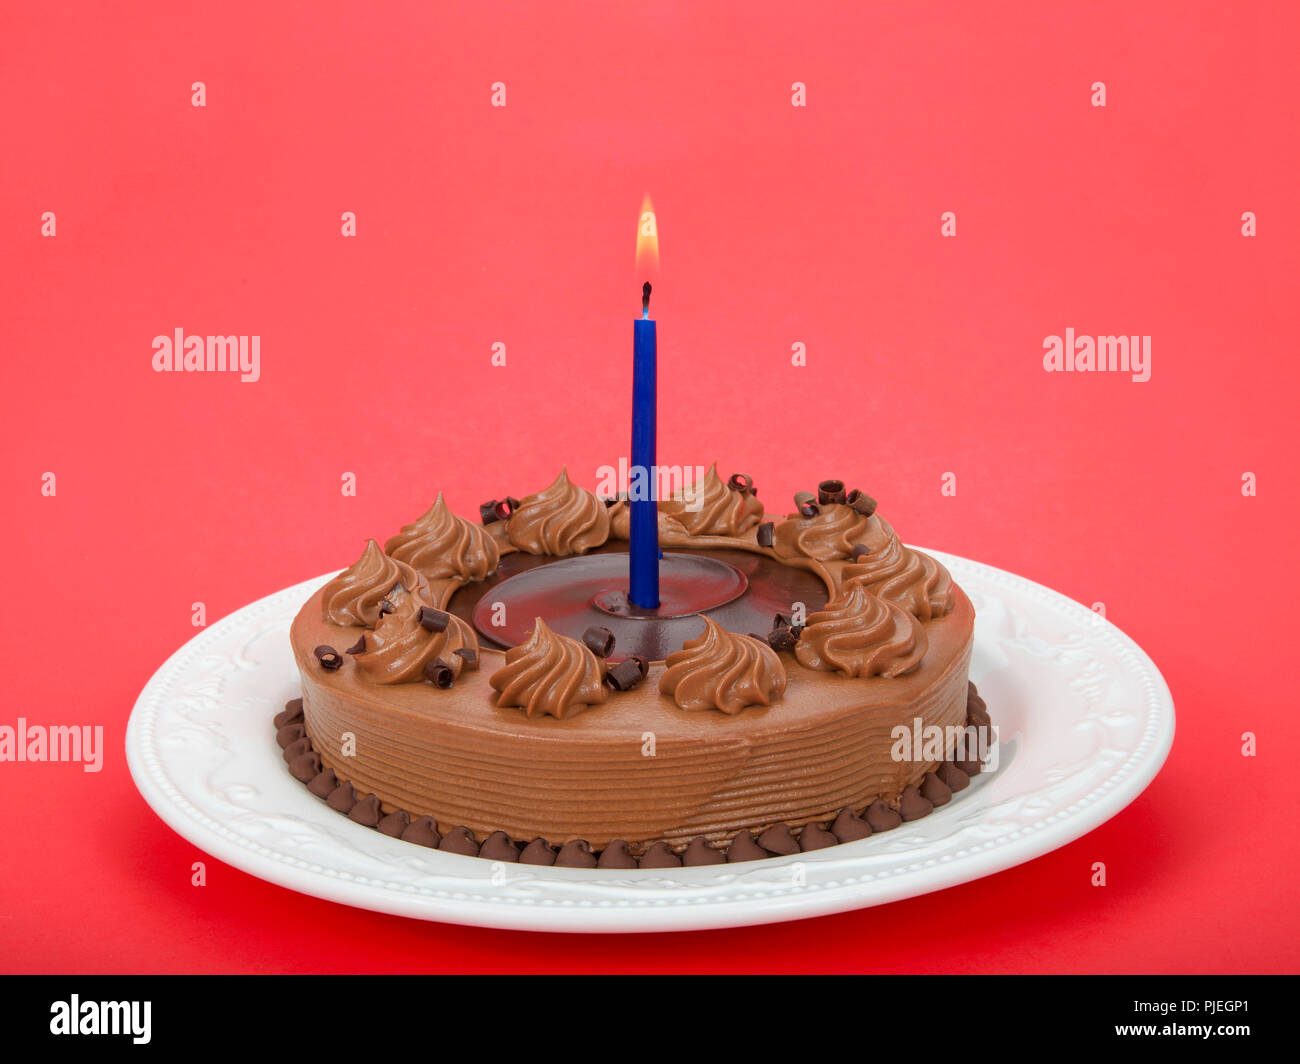 Home made chocolate cake with chocolate fudge on top on an off white porcelain plate with blue candle burning brightly on a red background Stock Photo